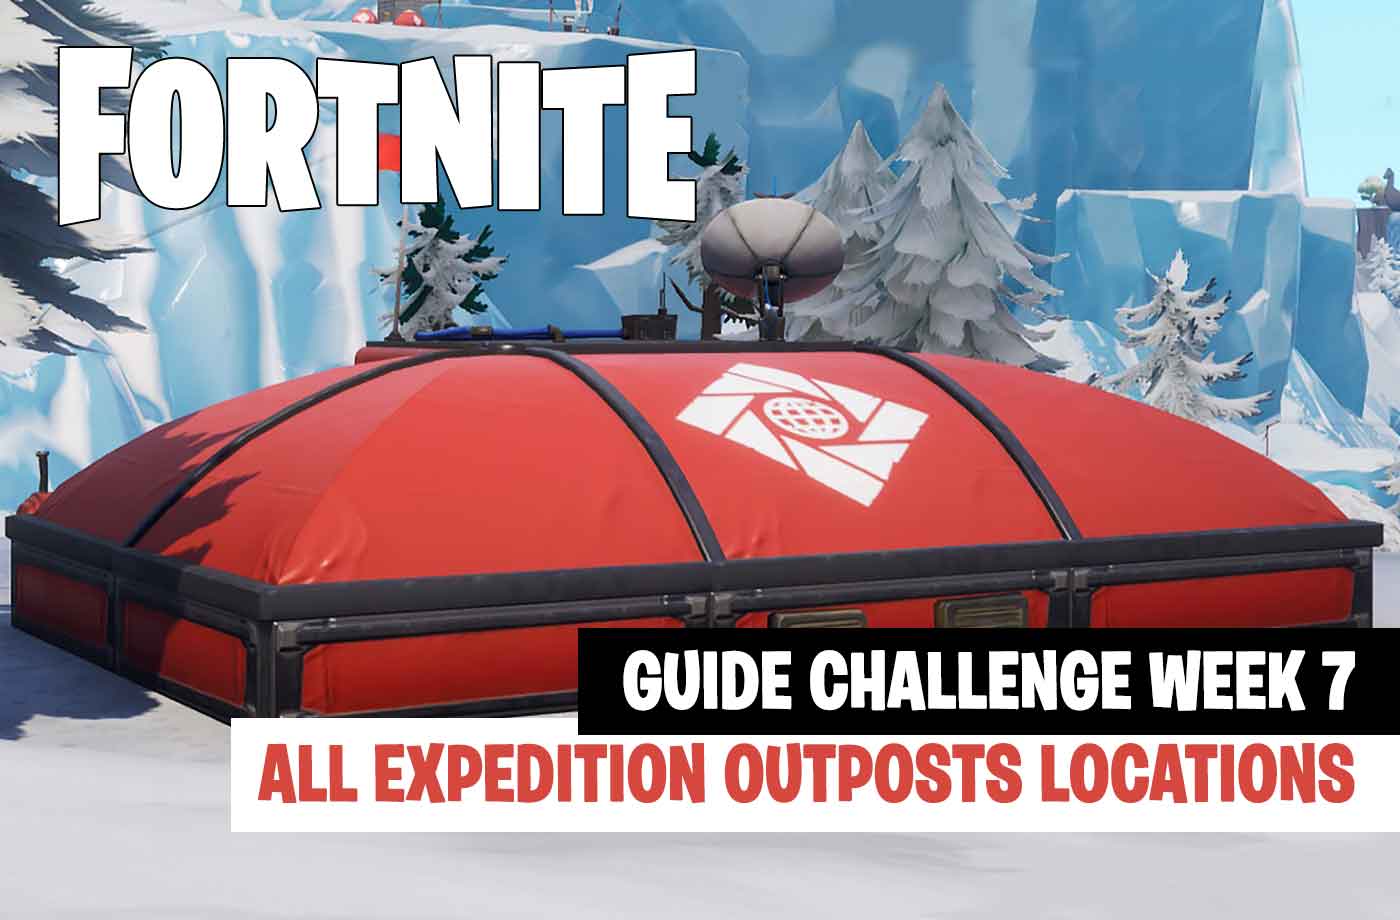 guide fortnite challenge of week 7 where all the expedition outposts are located list for season 7 - expedition posts fortnite location